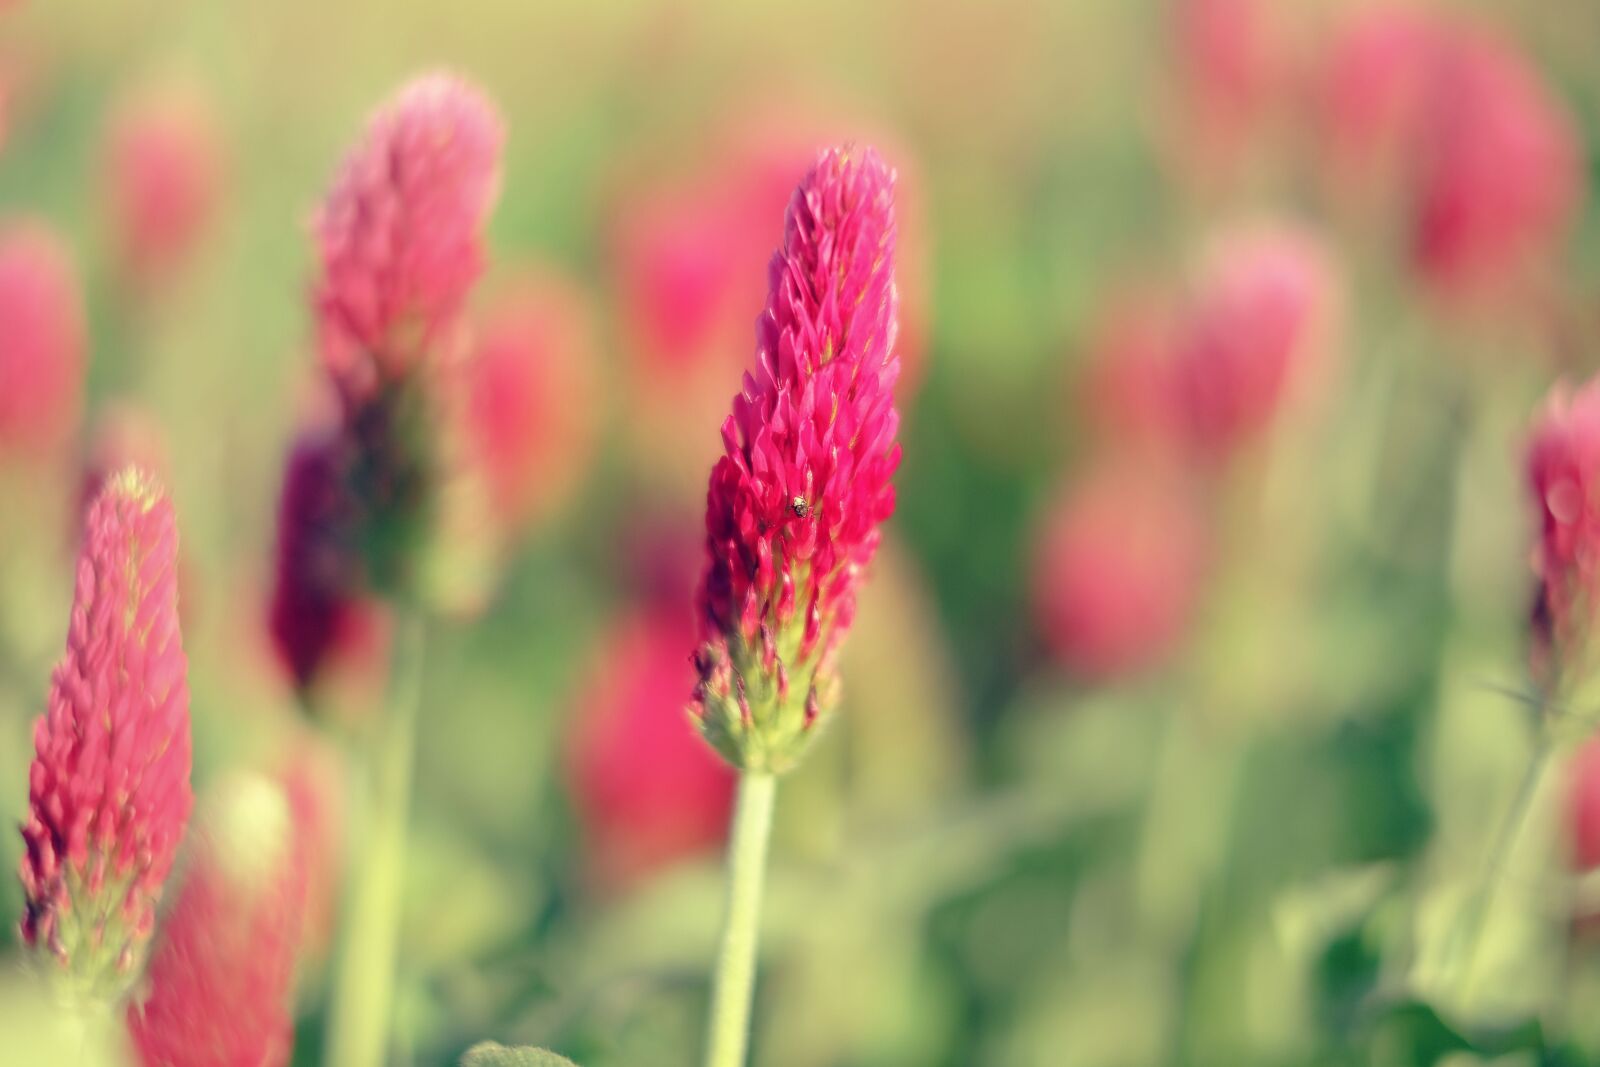 Fujifilm X-T20 sample photo. Nature, plant, red clover photography